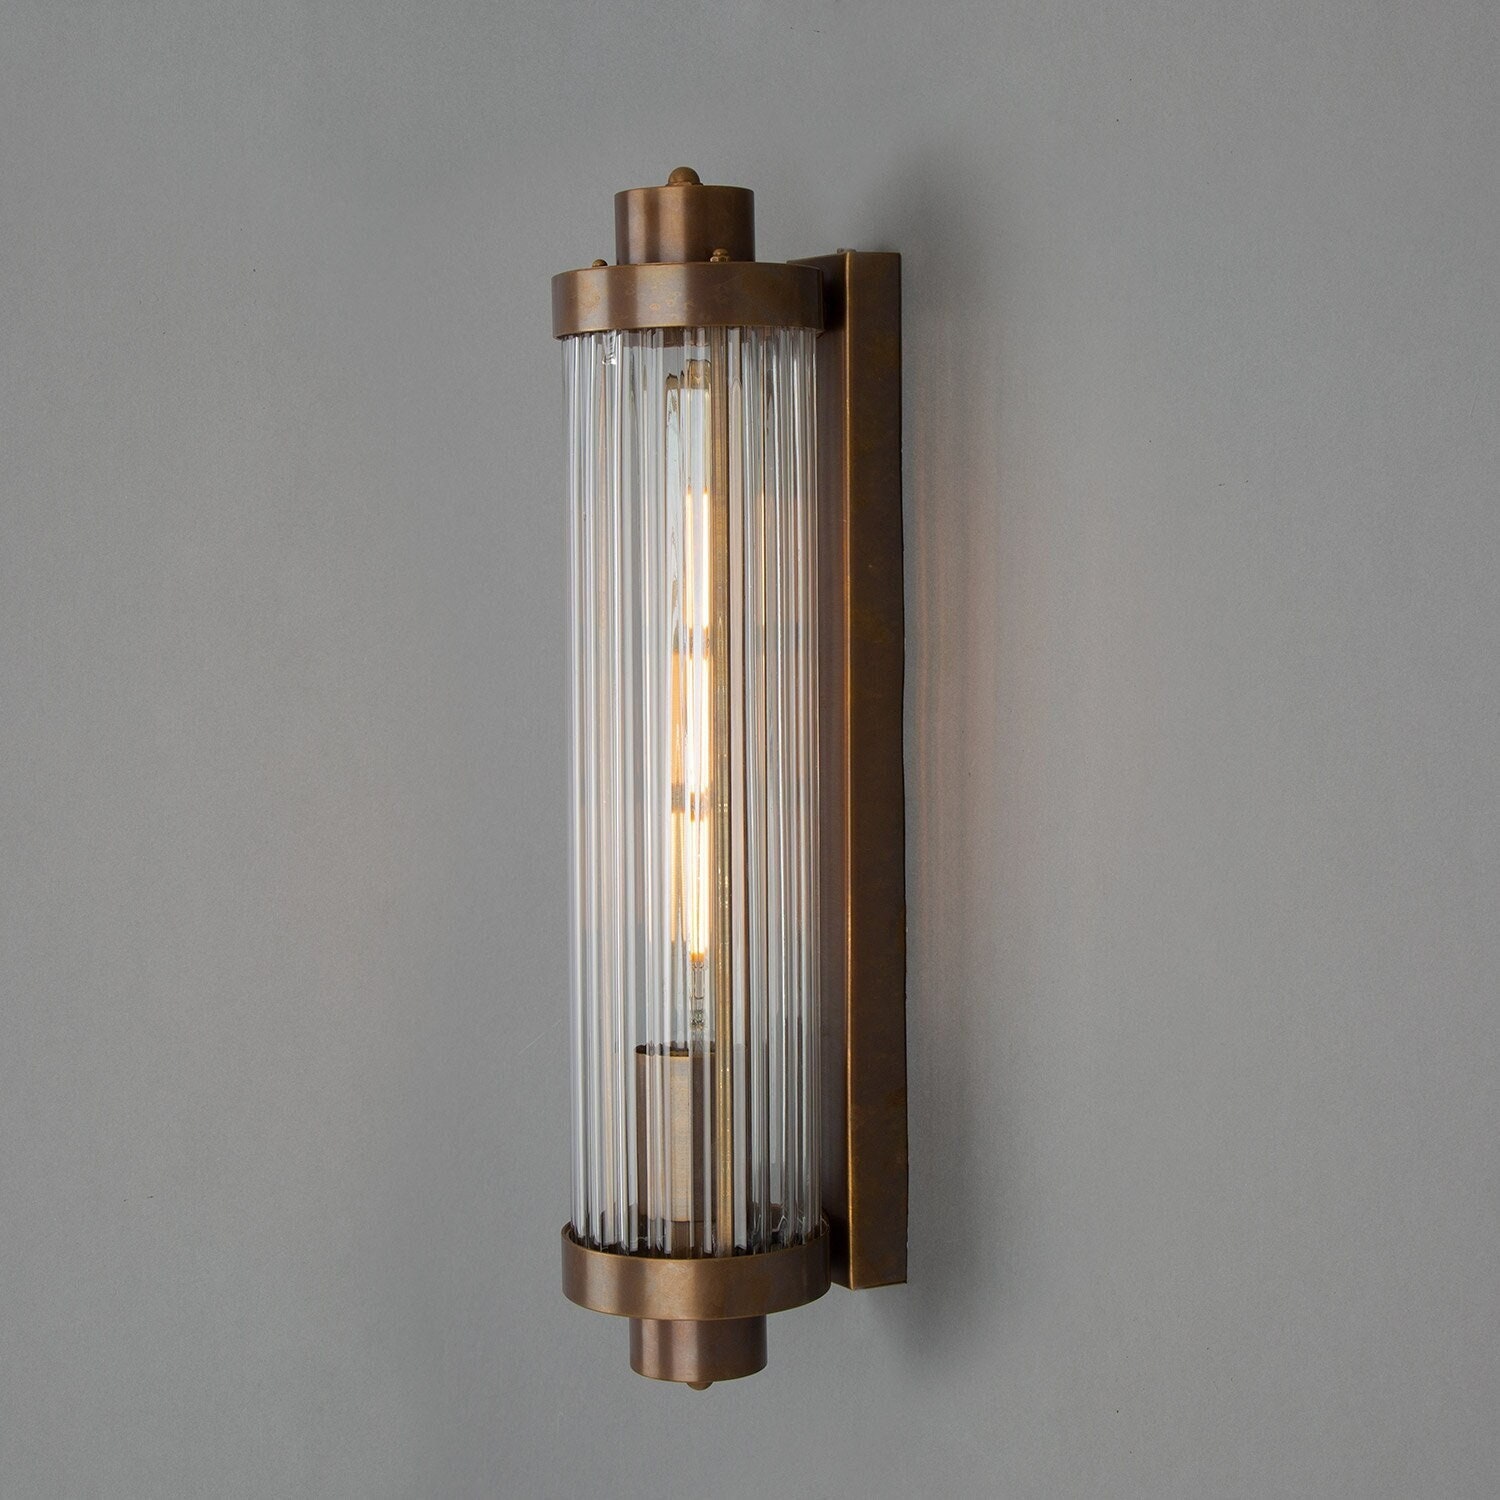 Retro Lighting Wall Sconce Vintage Wall Lamp Space Age Spot lights